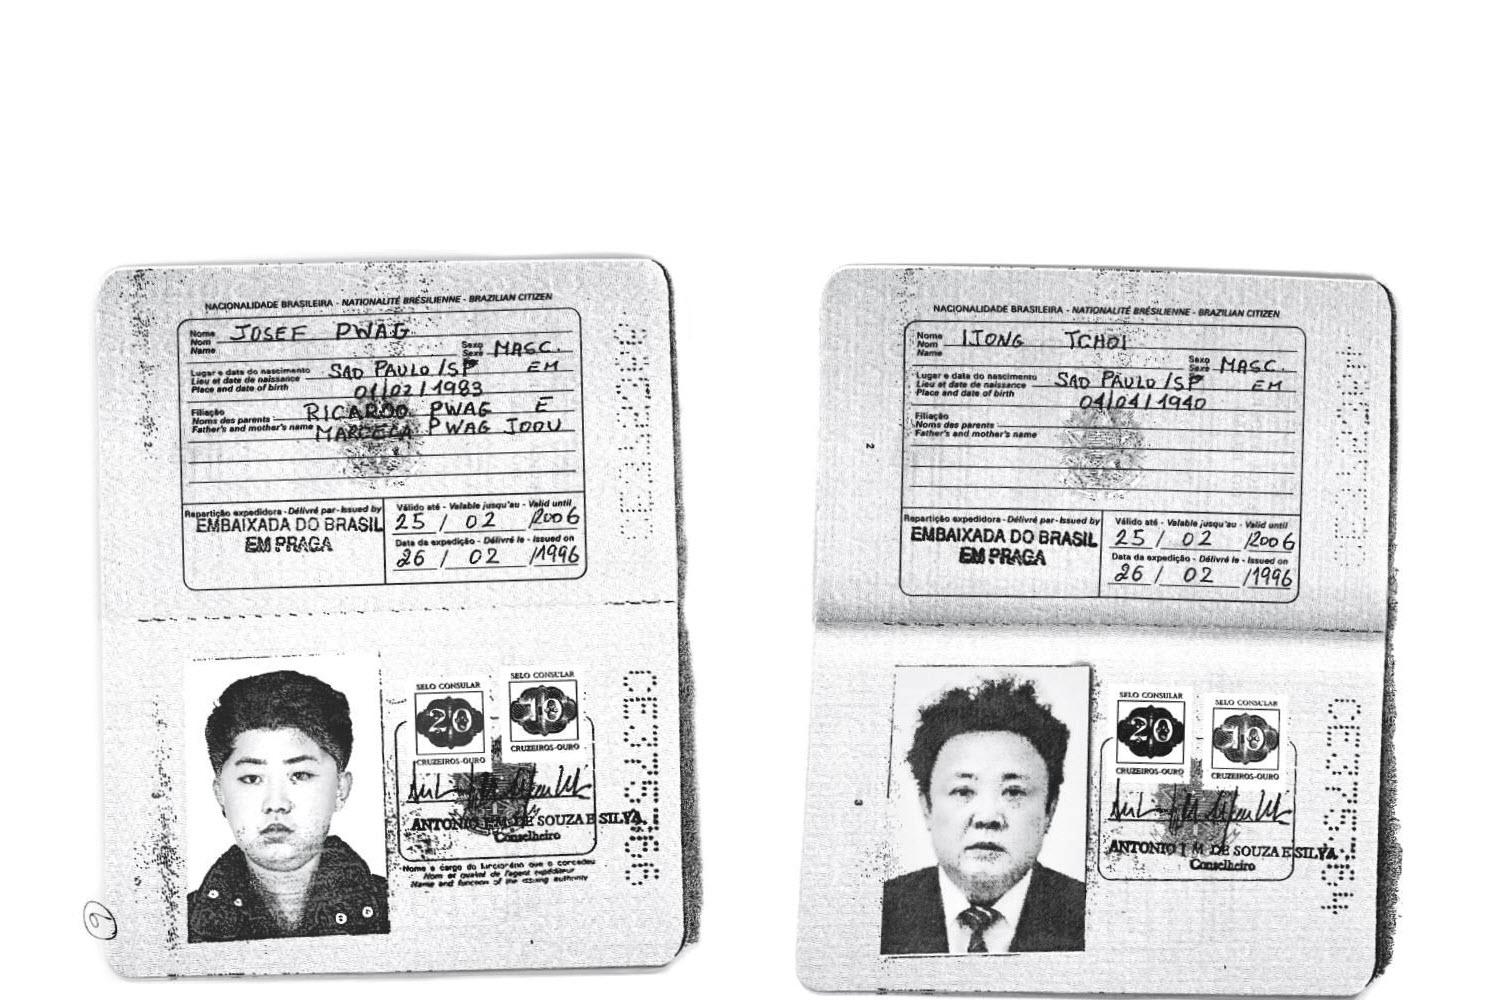 A scan obtained by Reuters shows authentic Brazilian passports issued to North Korea's current leader Kim Jong-un and late leader Kim Jong-il.